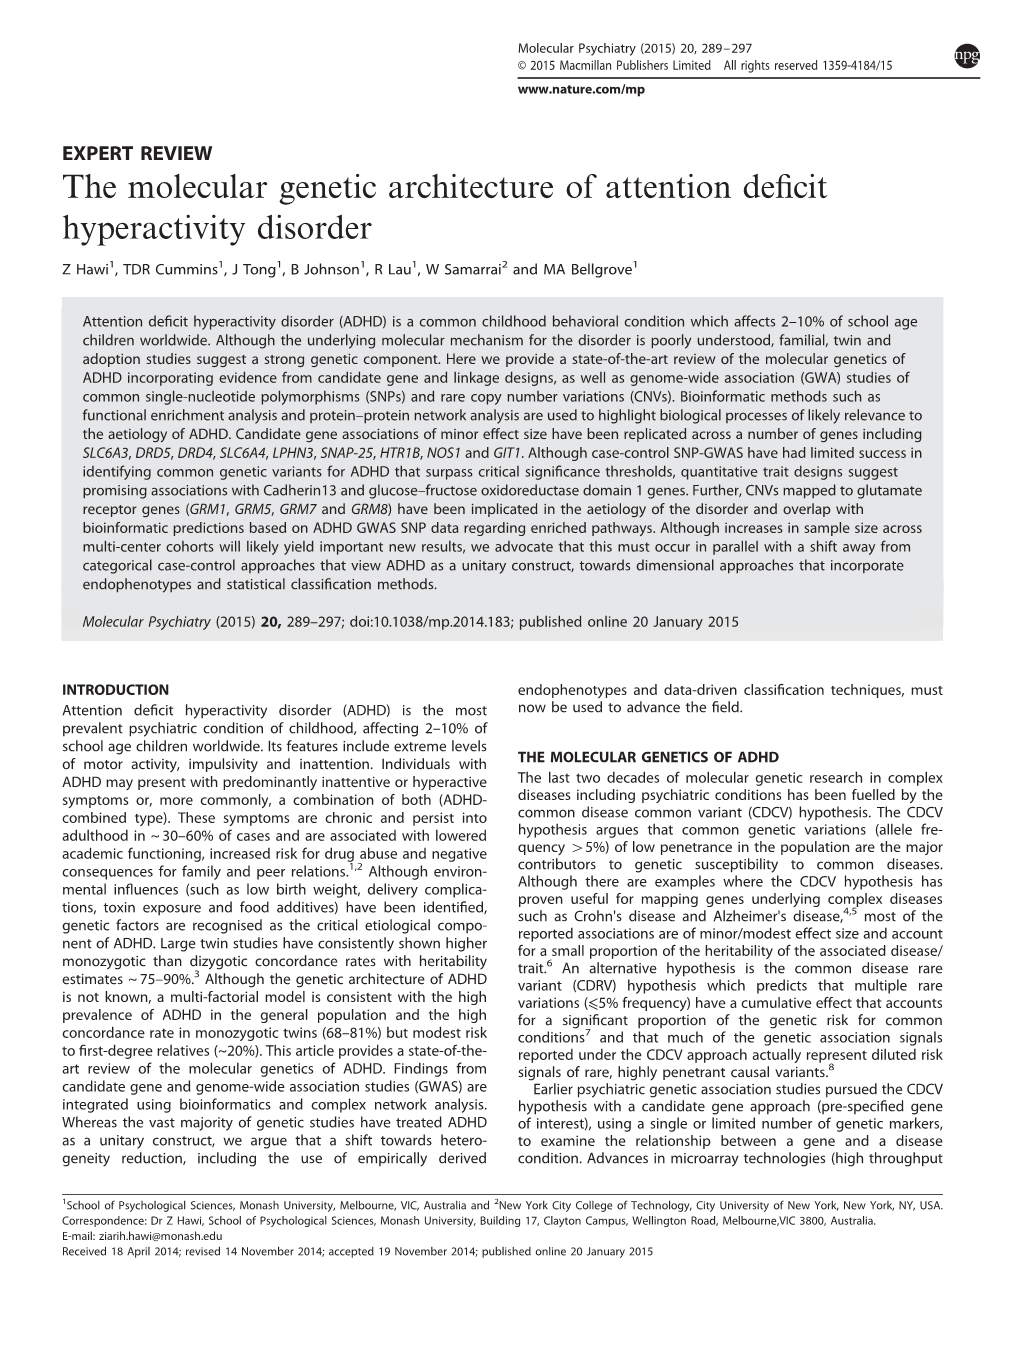 The Molecular Genetic Architecture of Attention Deficit Hyperactivity Disorder